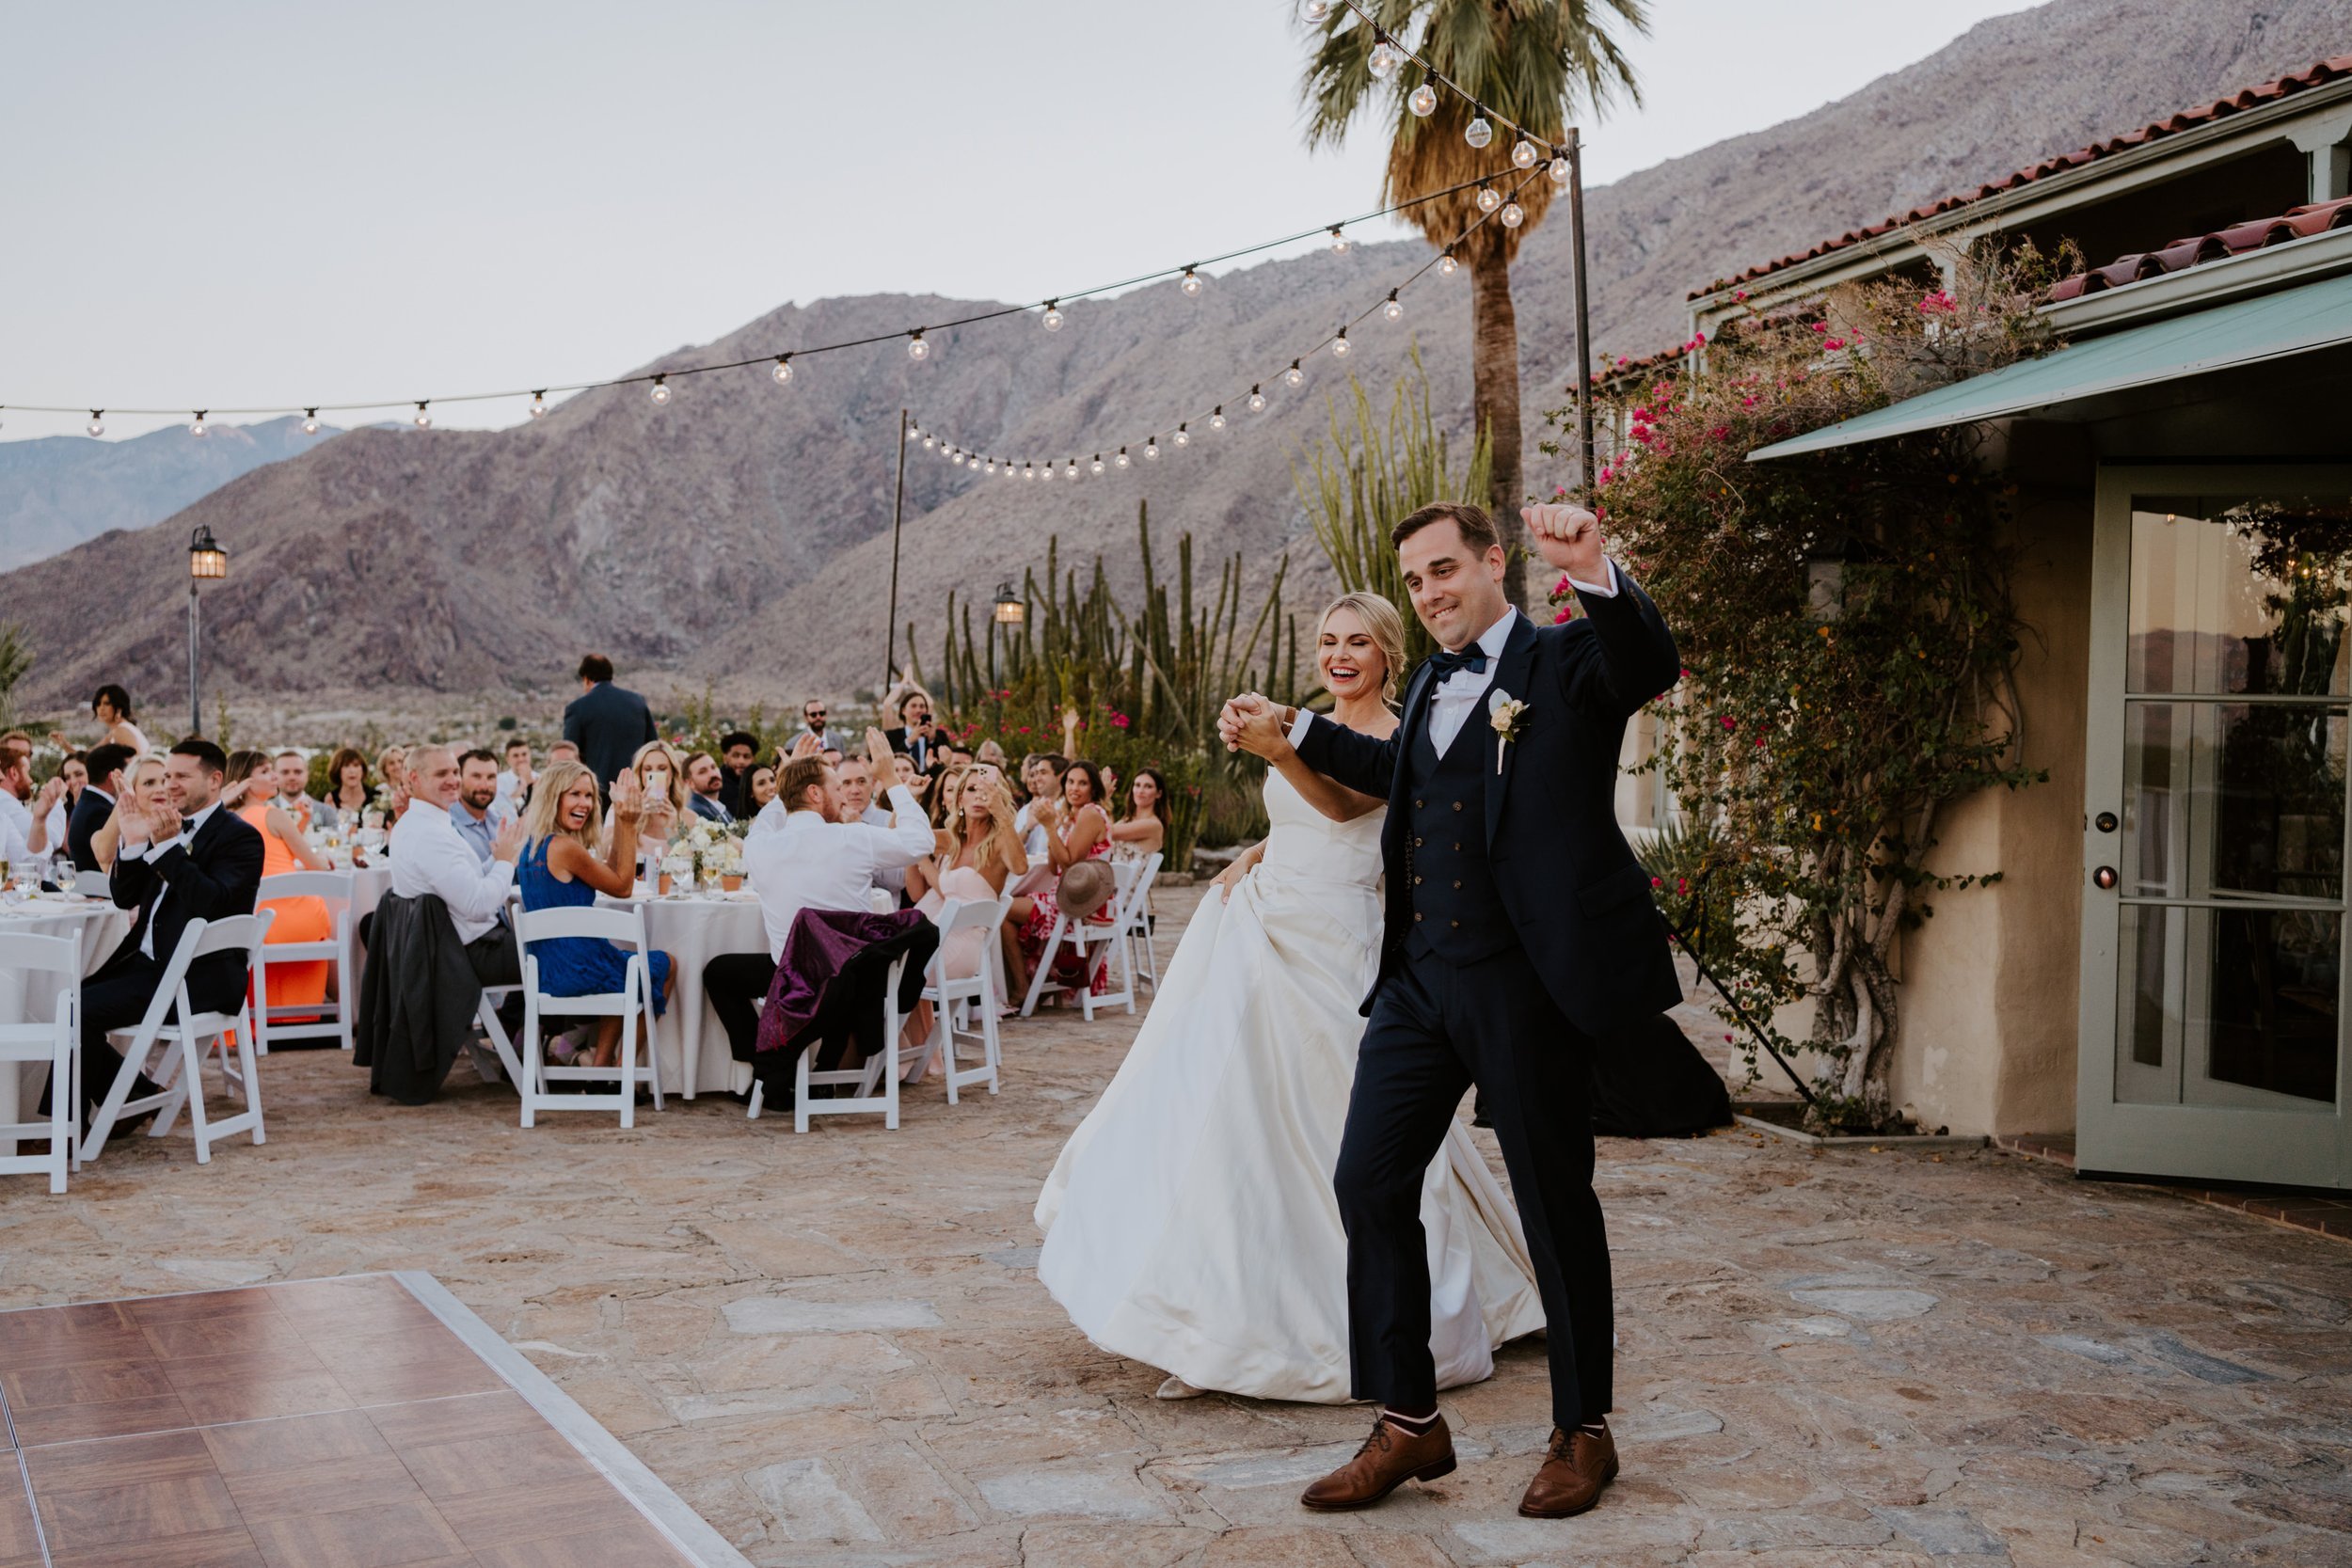 Wedding reception setup at The O’Donnell House Palm Springs, Tida Svy Photography